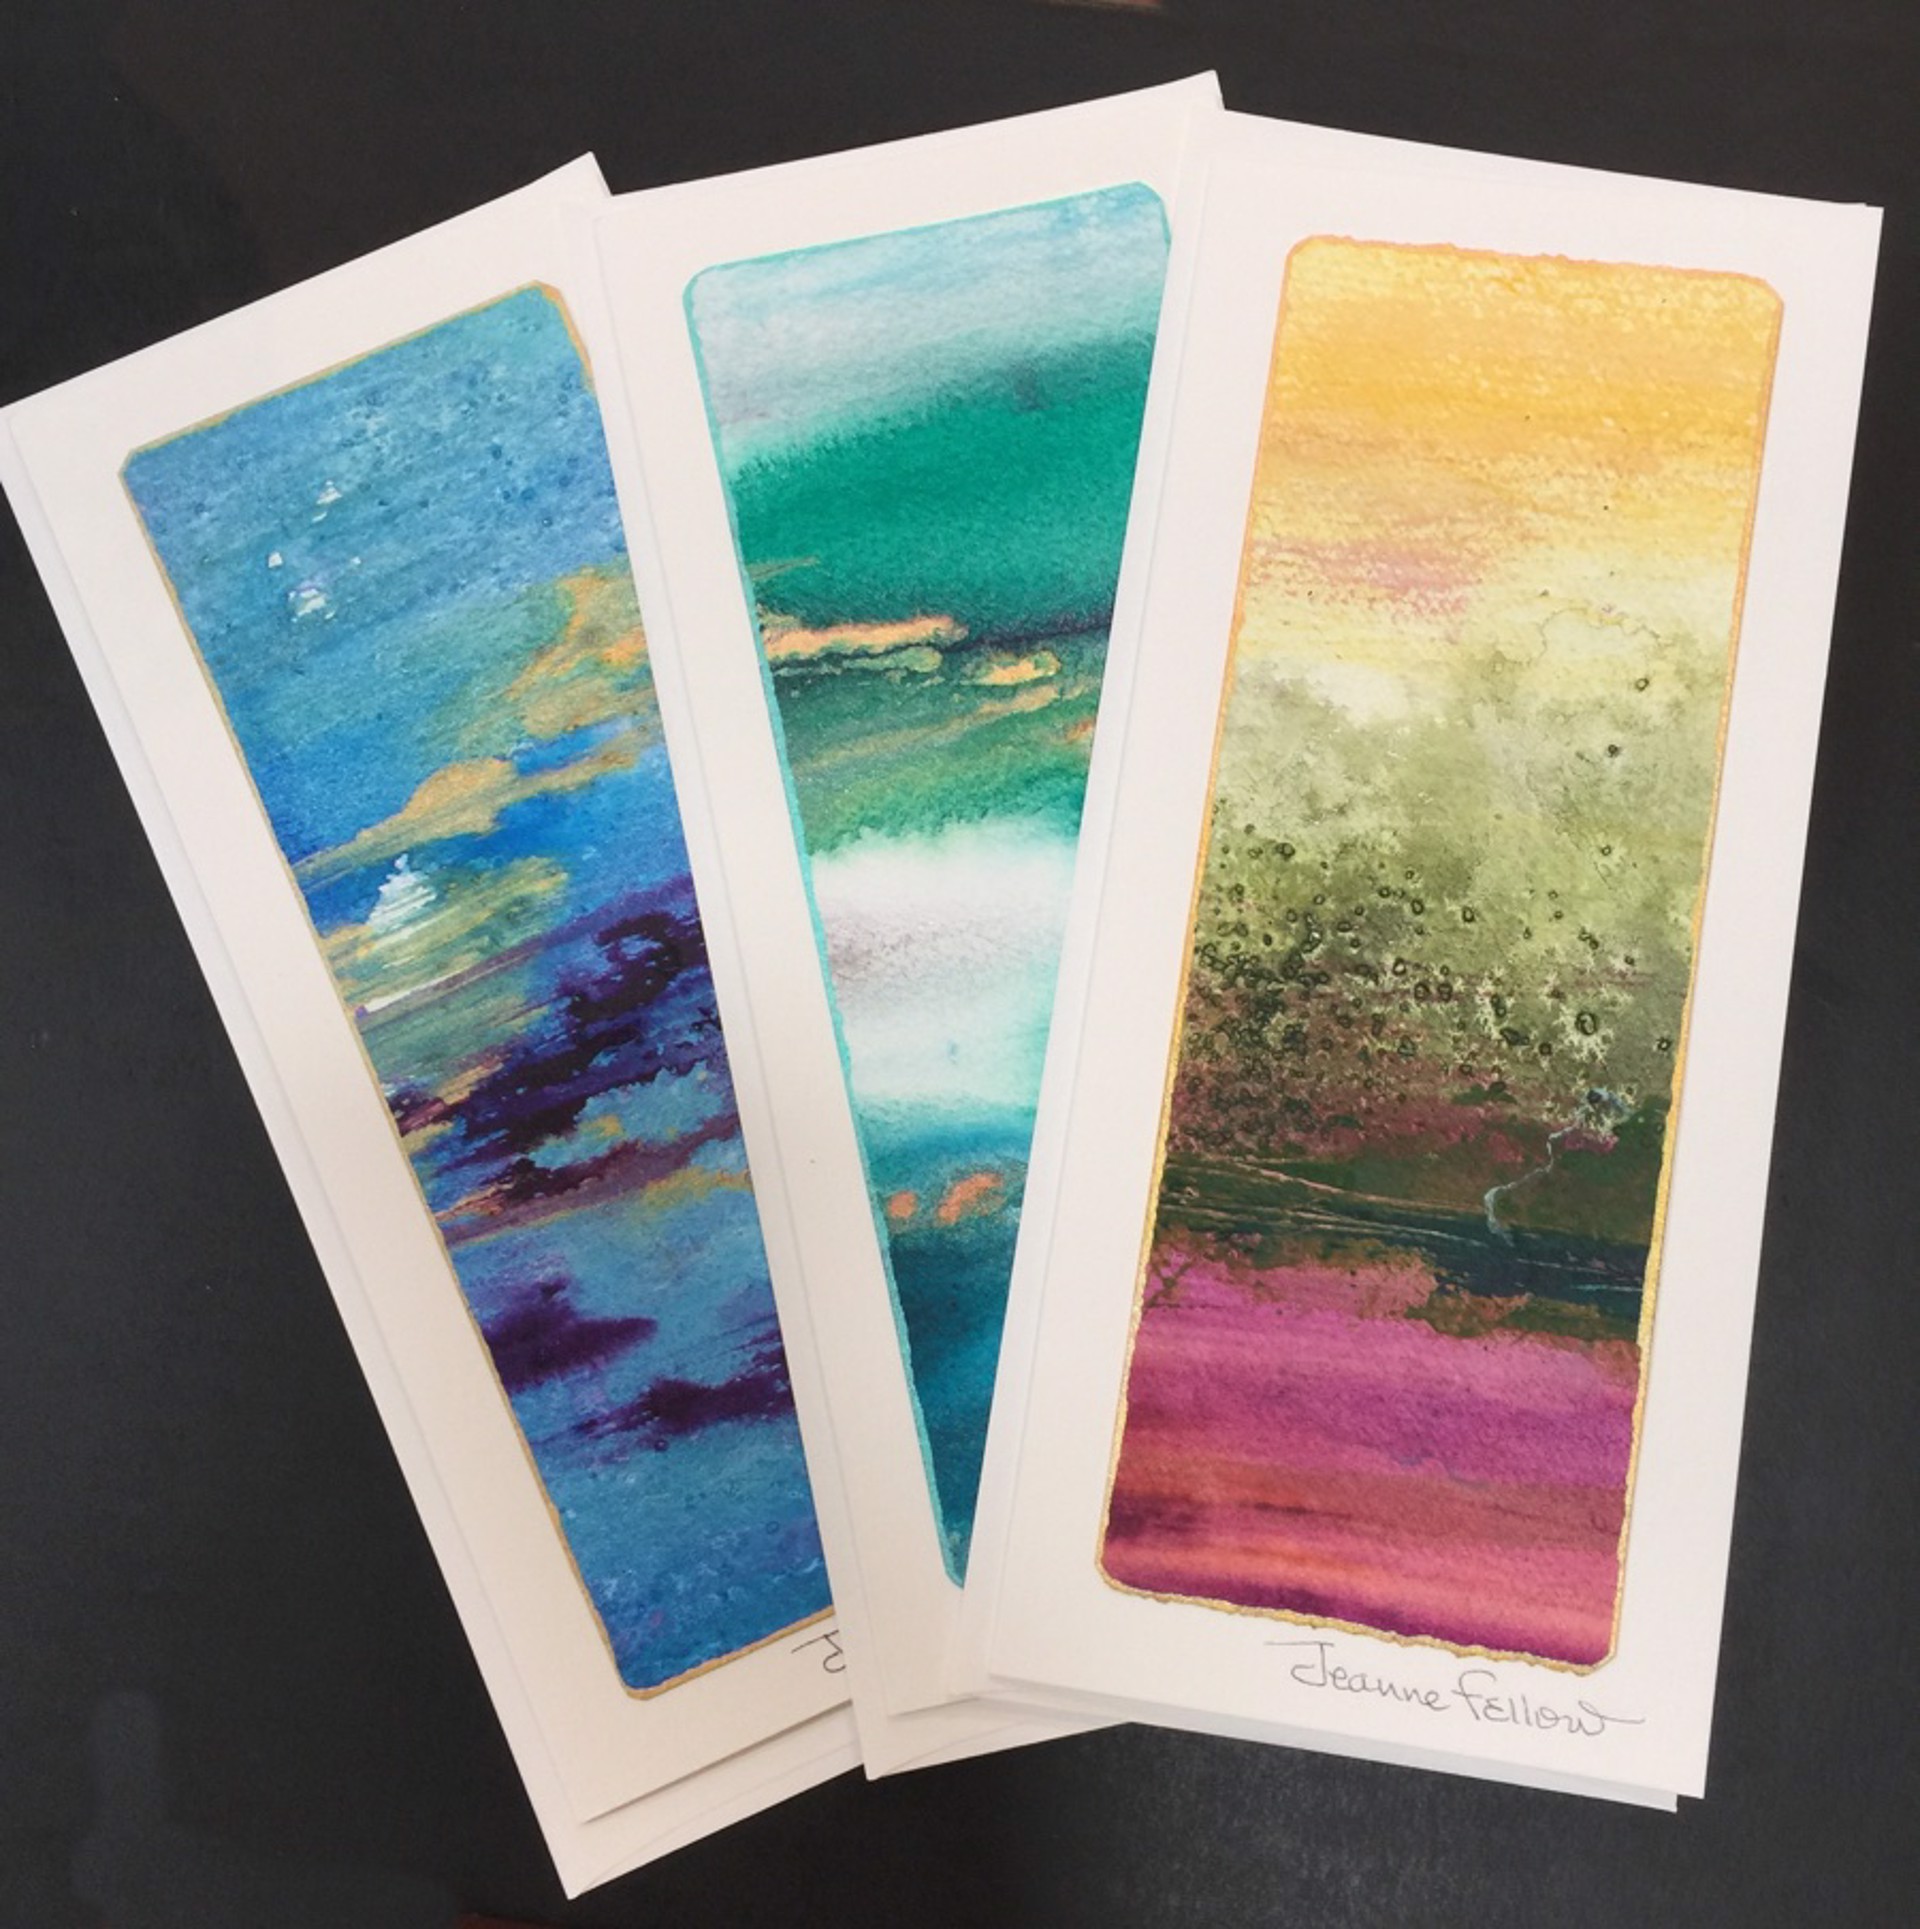 Card - Tall Handpainted Artscapes By Jeanne Fellow by Jeanne Fellow